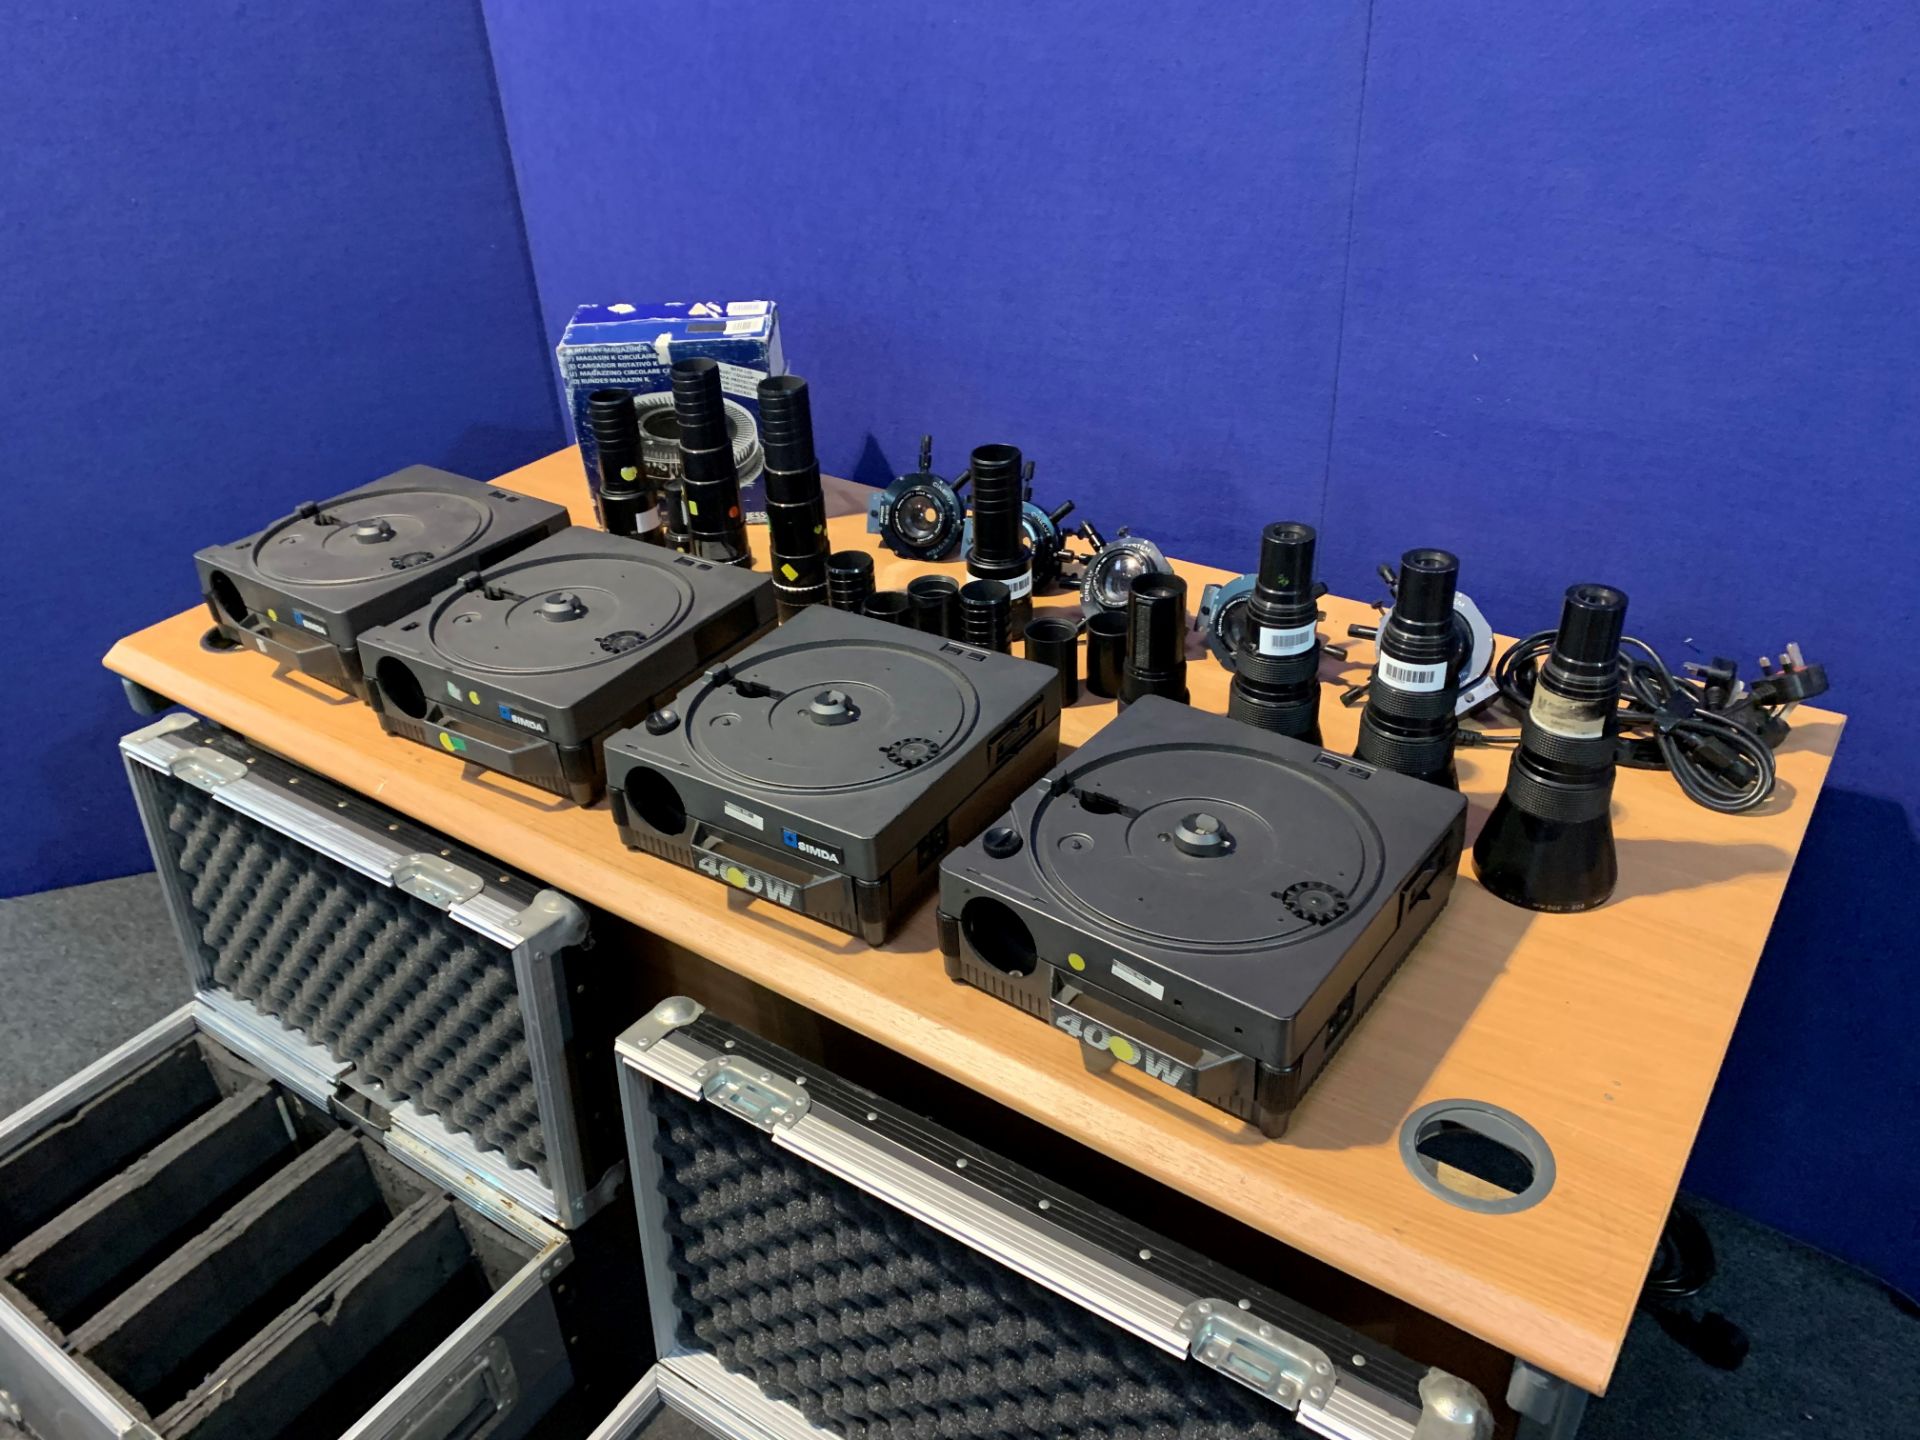 4 x 35mm 400w Simda Slide Projectors, with Lenses, Cables, Slide Trays,Remotes & 2 Flight Cases - Image 2 of 5